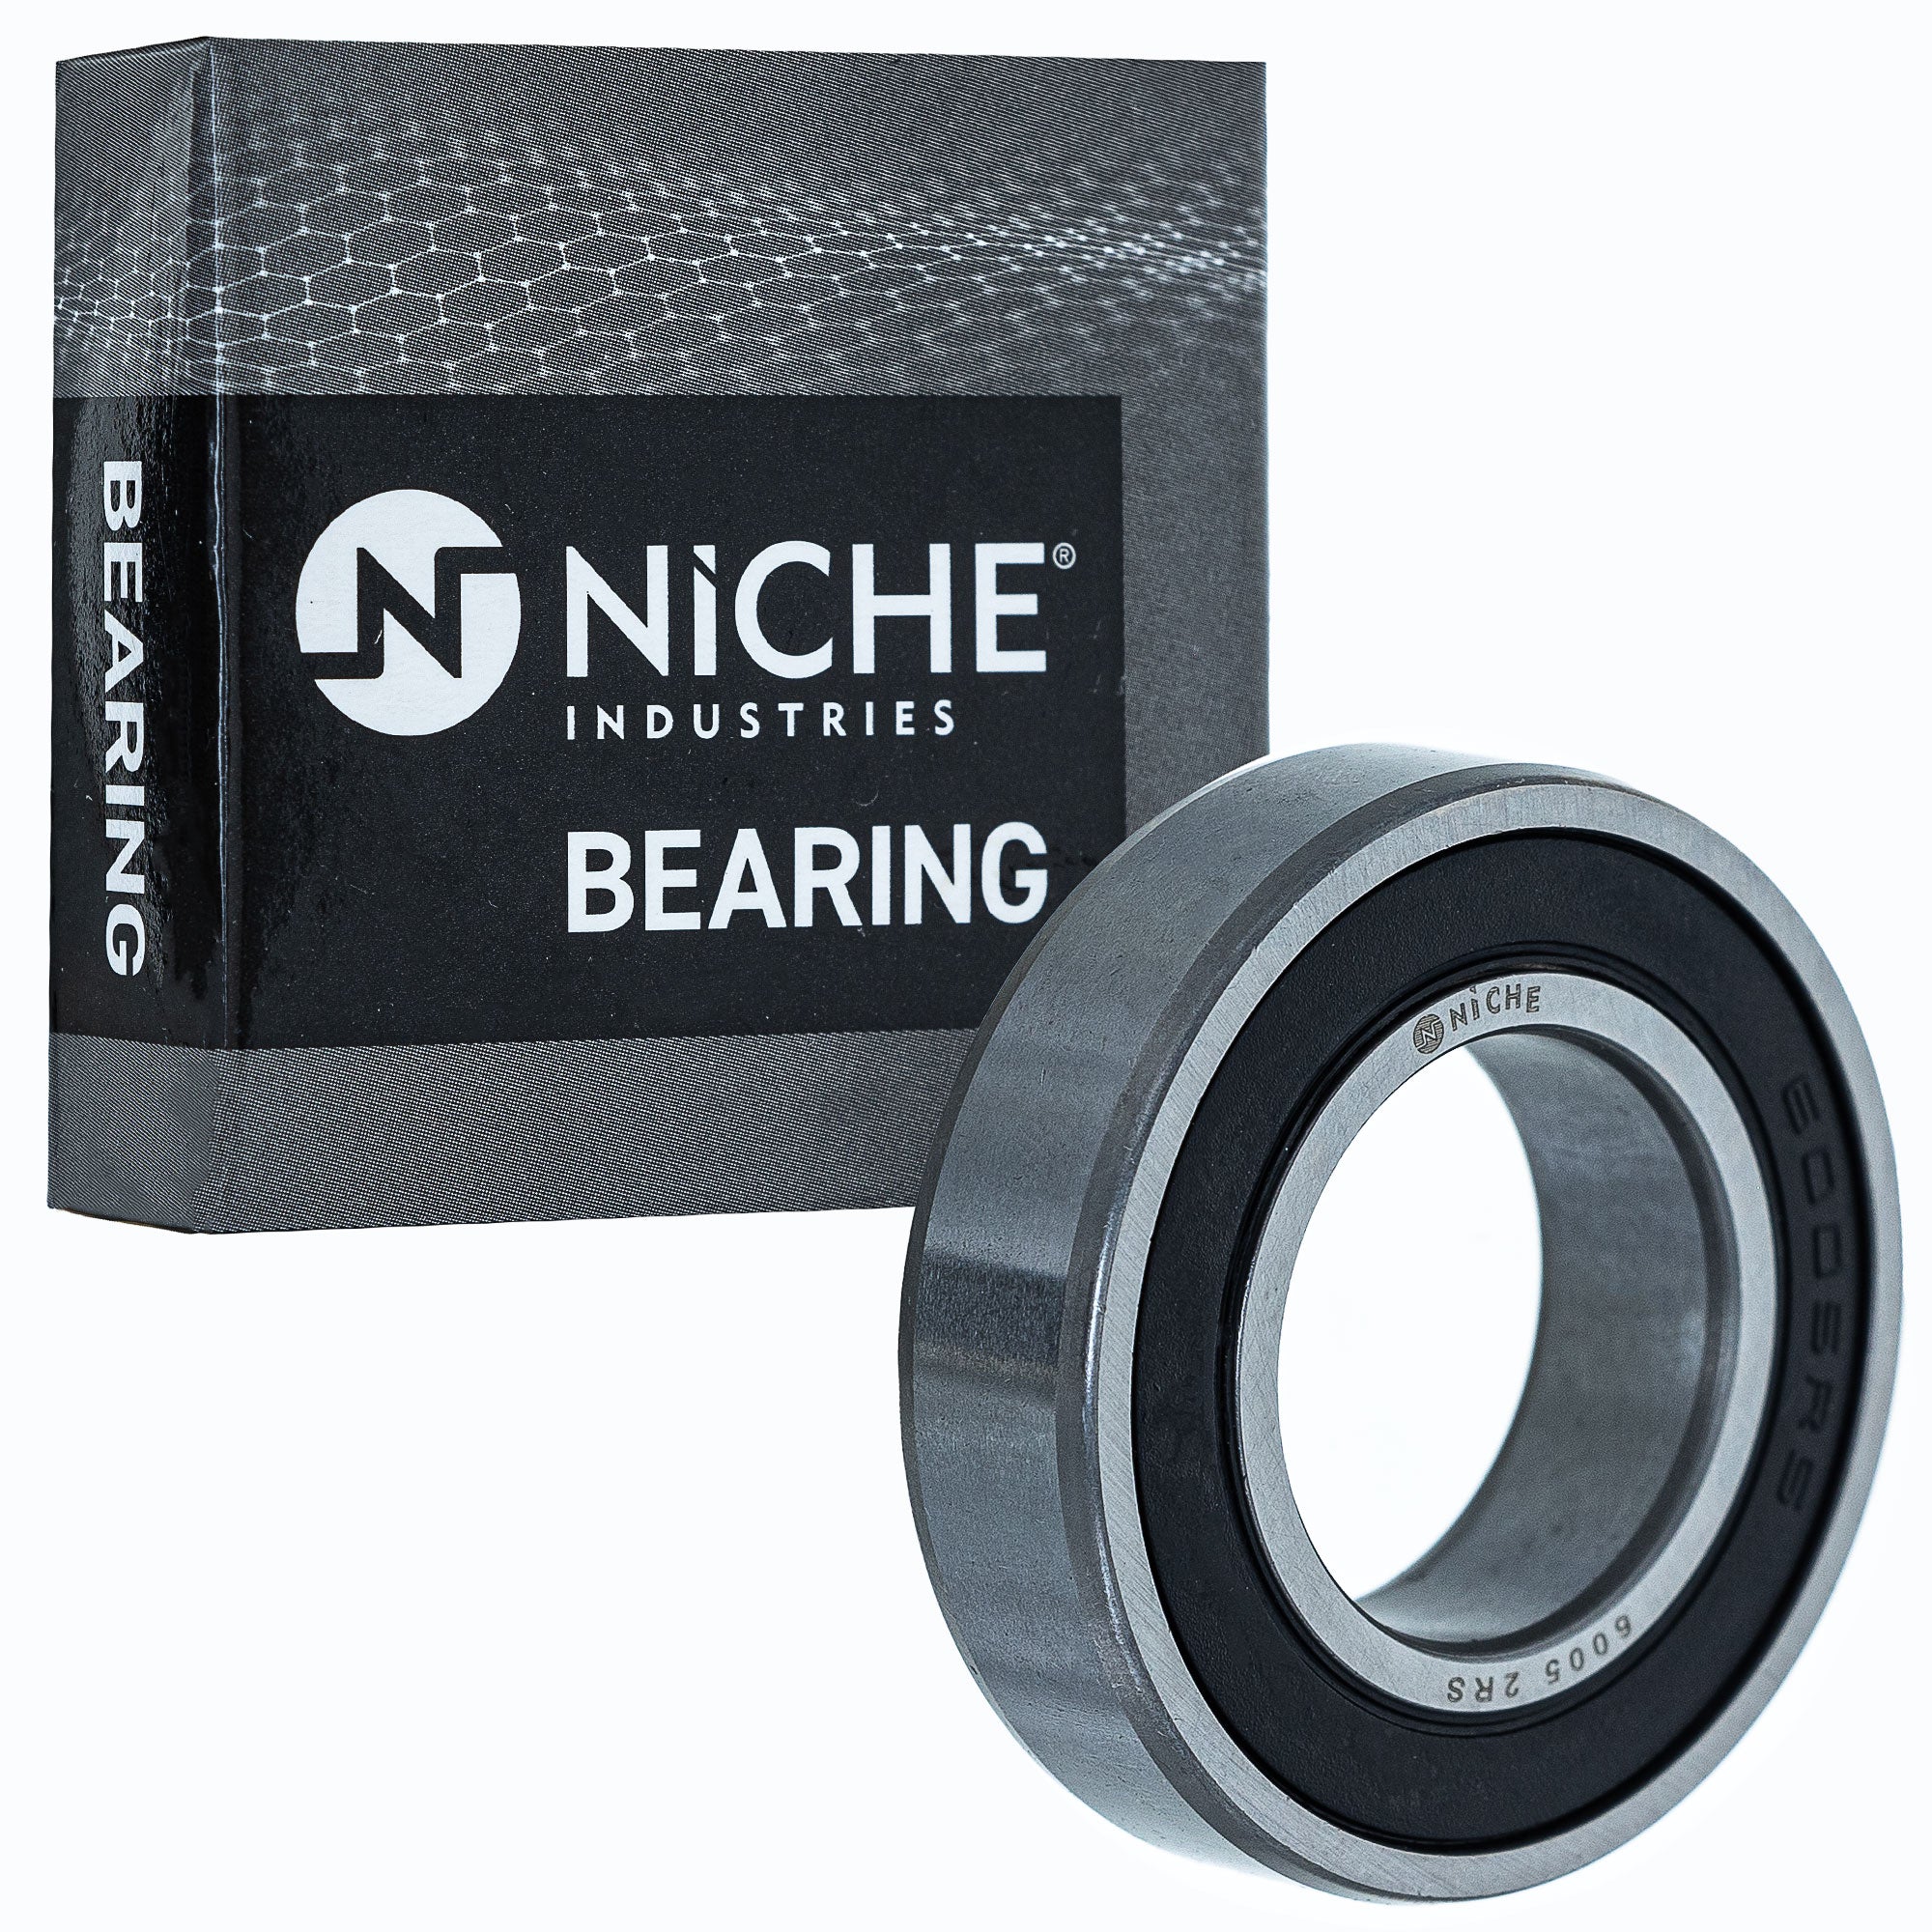 NICHE 519-CBB2234R Bearing & Seal Kit for zOTHER RVT1000R RC51